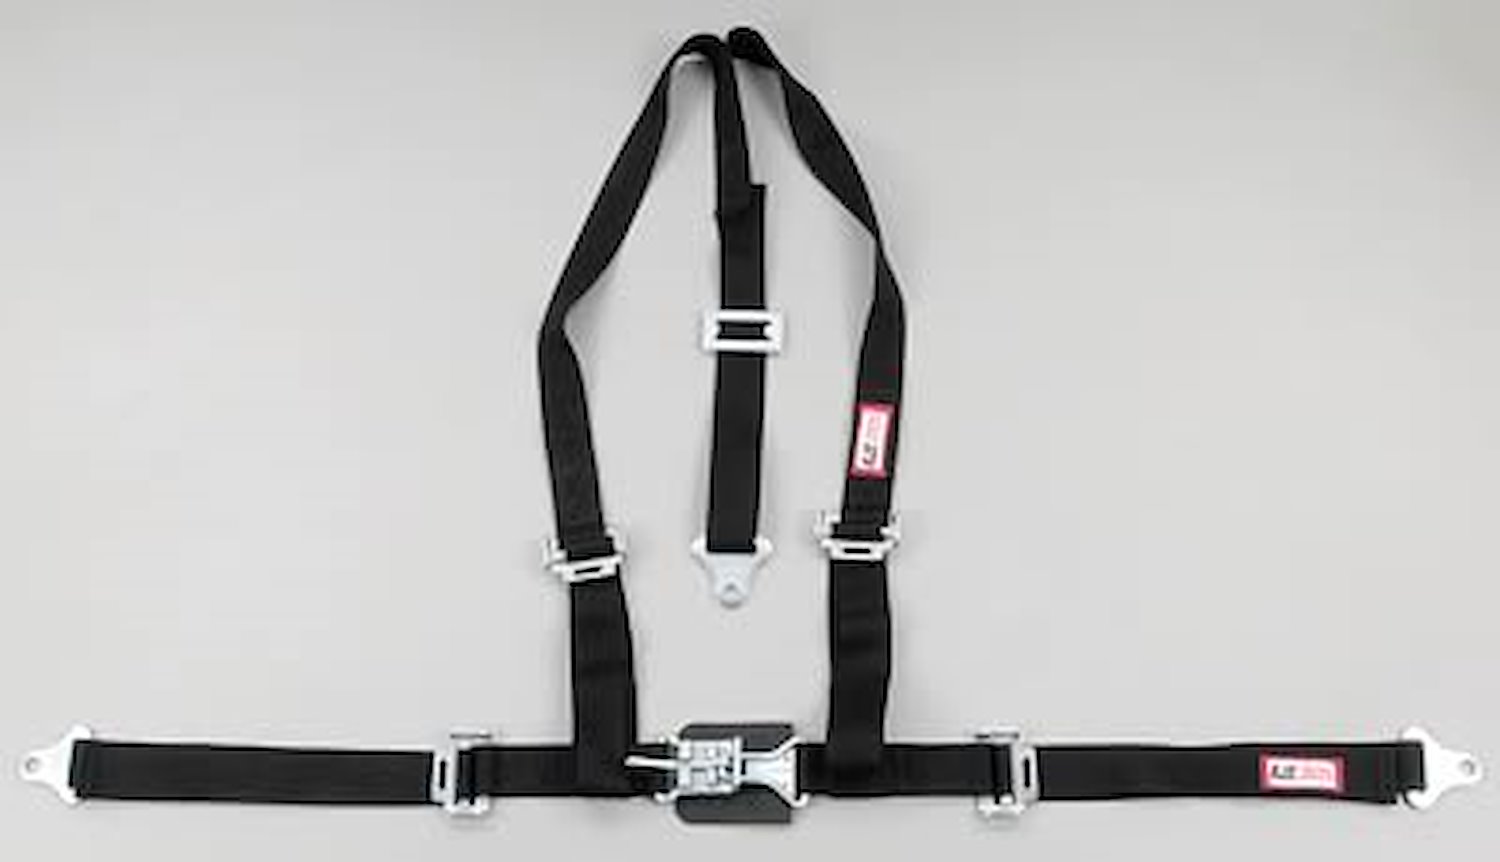 NON-SFI L&L HARNESS 3 PULL DOWN Lap Belt w/adjuster 2 S.H. Individual FLOOR Mount ALL WRAP ENDS GRAY